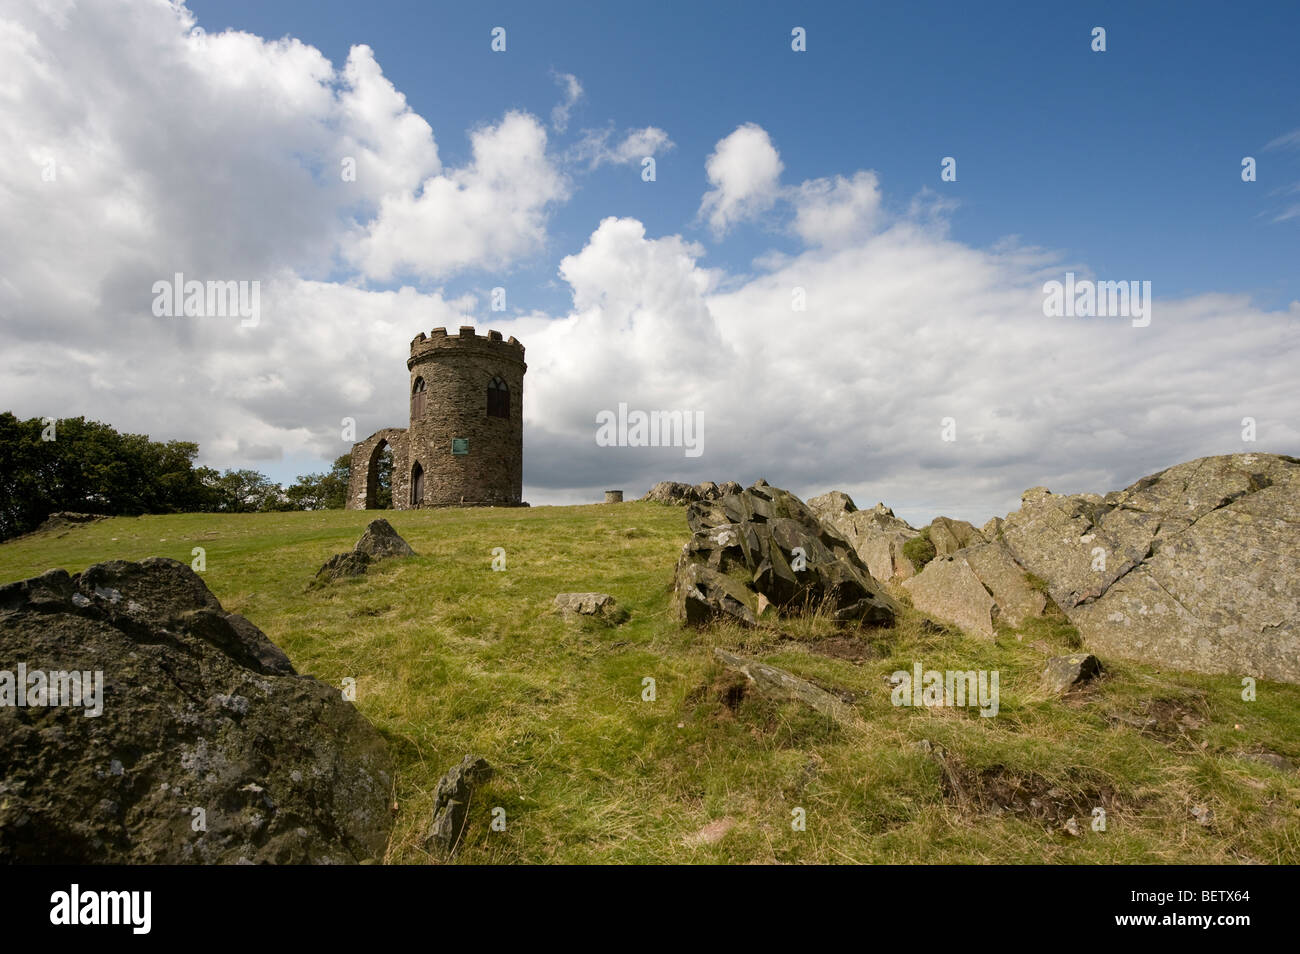 Old John Tower at Bradgate Park, Leicestershire, England Stock Photo